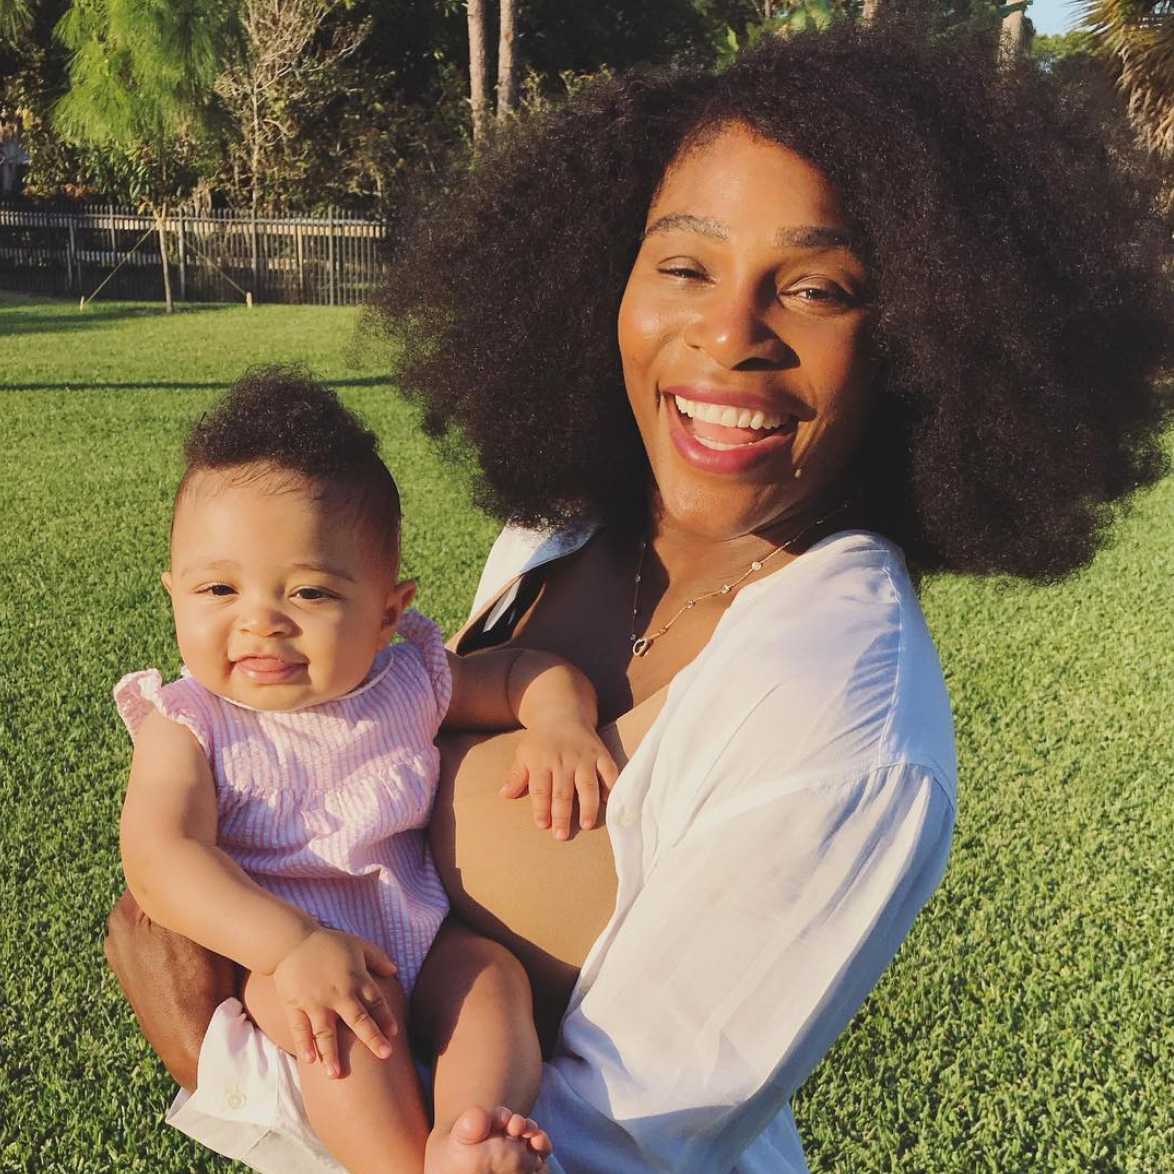 Could These Photos Of Serena Williams, Her Husband Alexis Ohanian and Their Daughter Be Any More Adorable?
